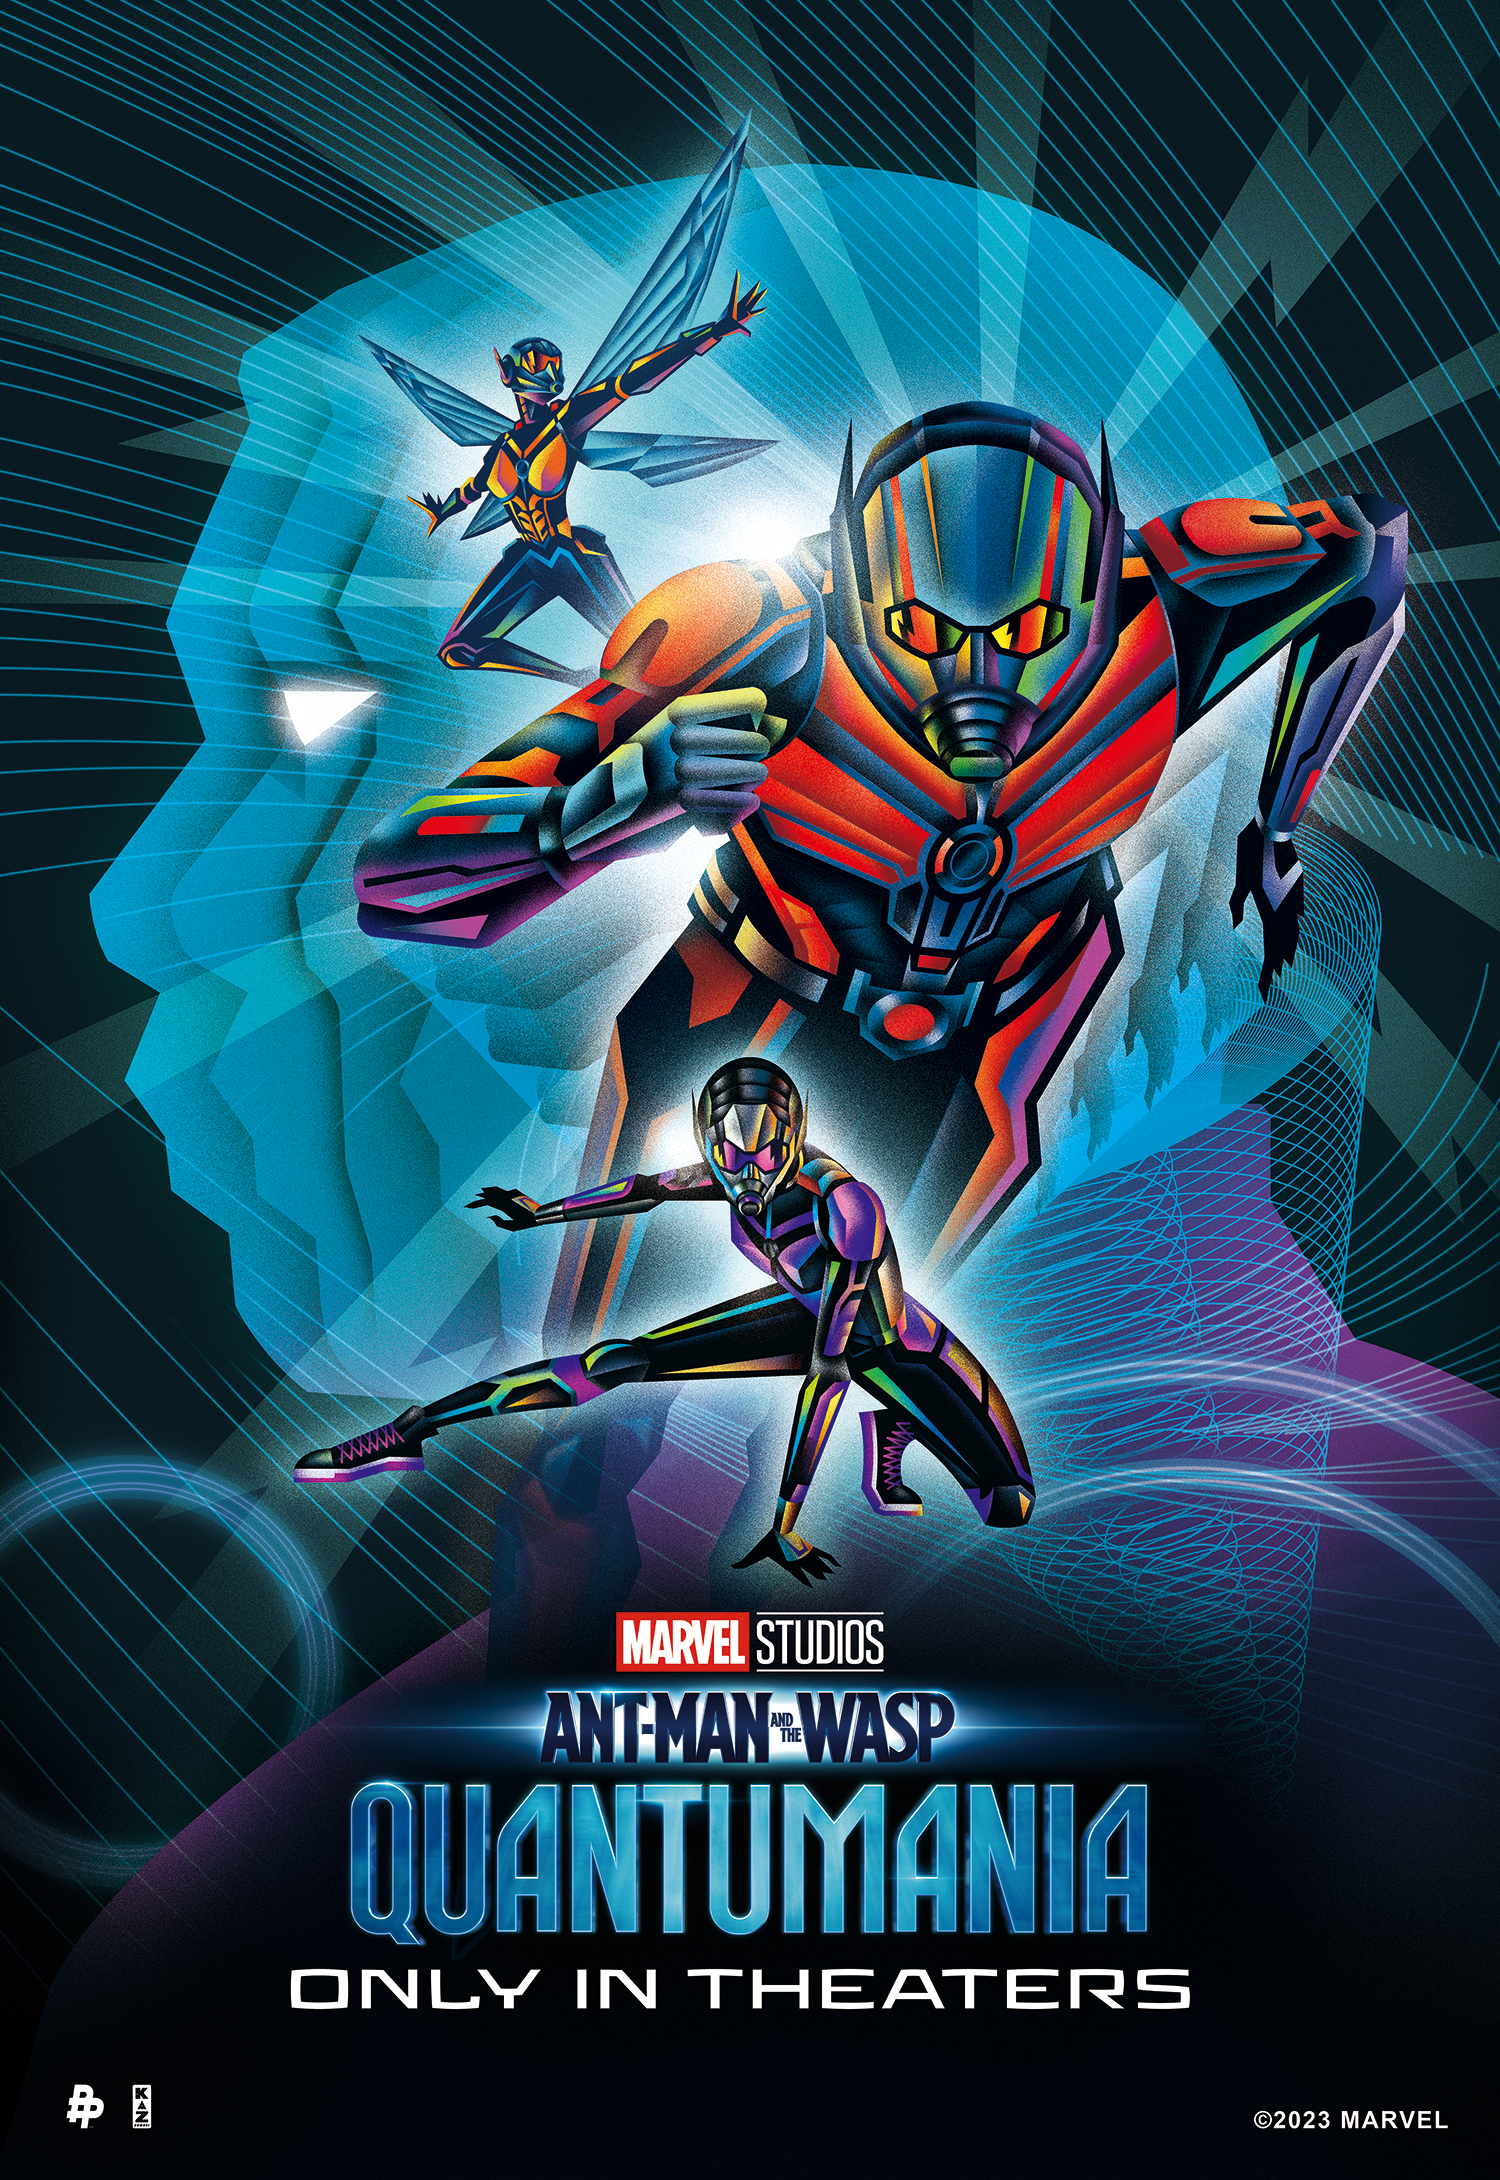 Artwork by Ant-Man & The Wasp: Quantumania – Cinema Partnerships